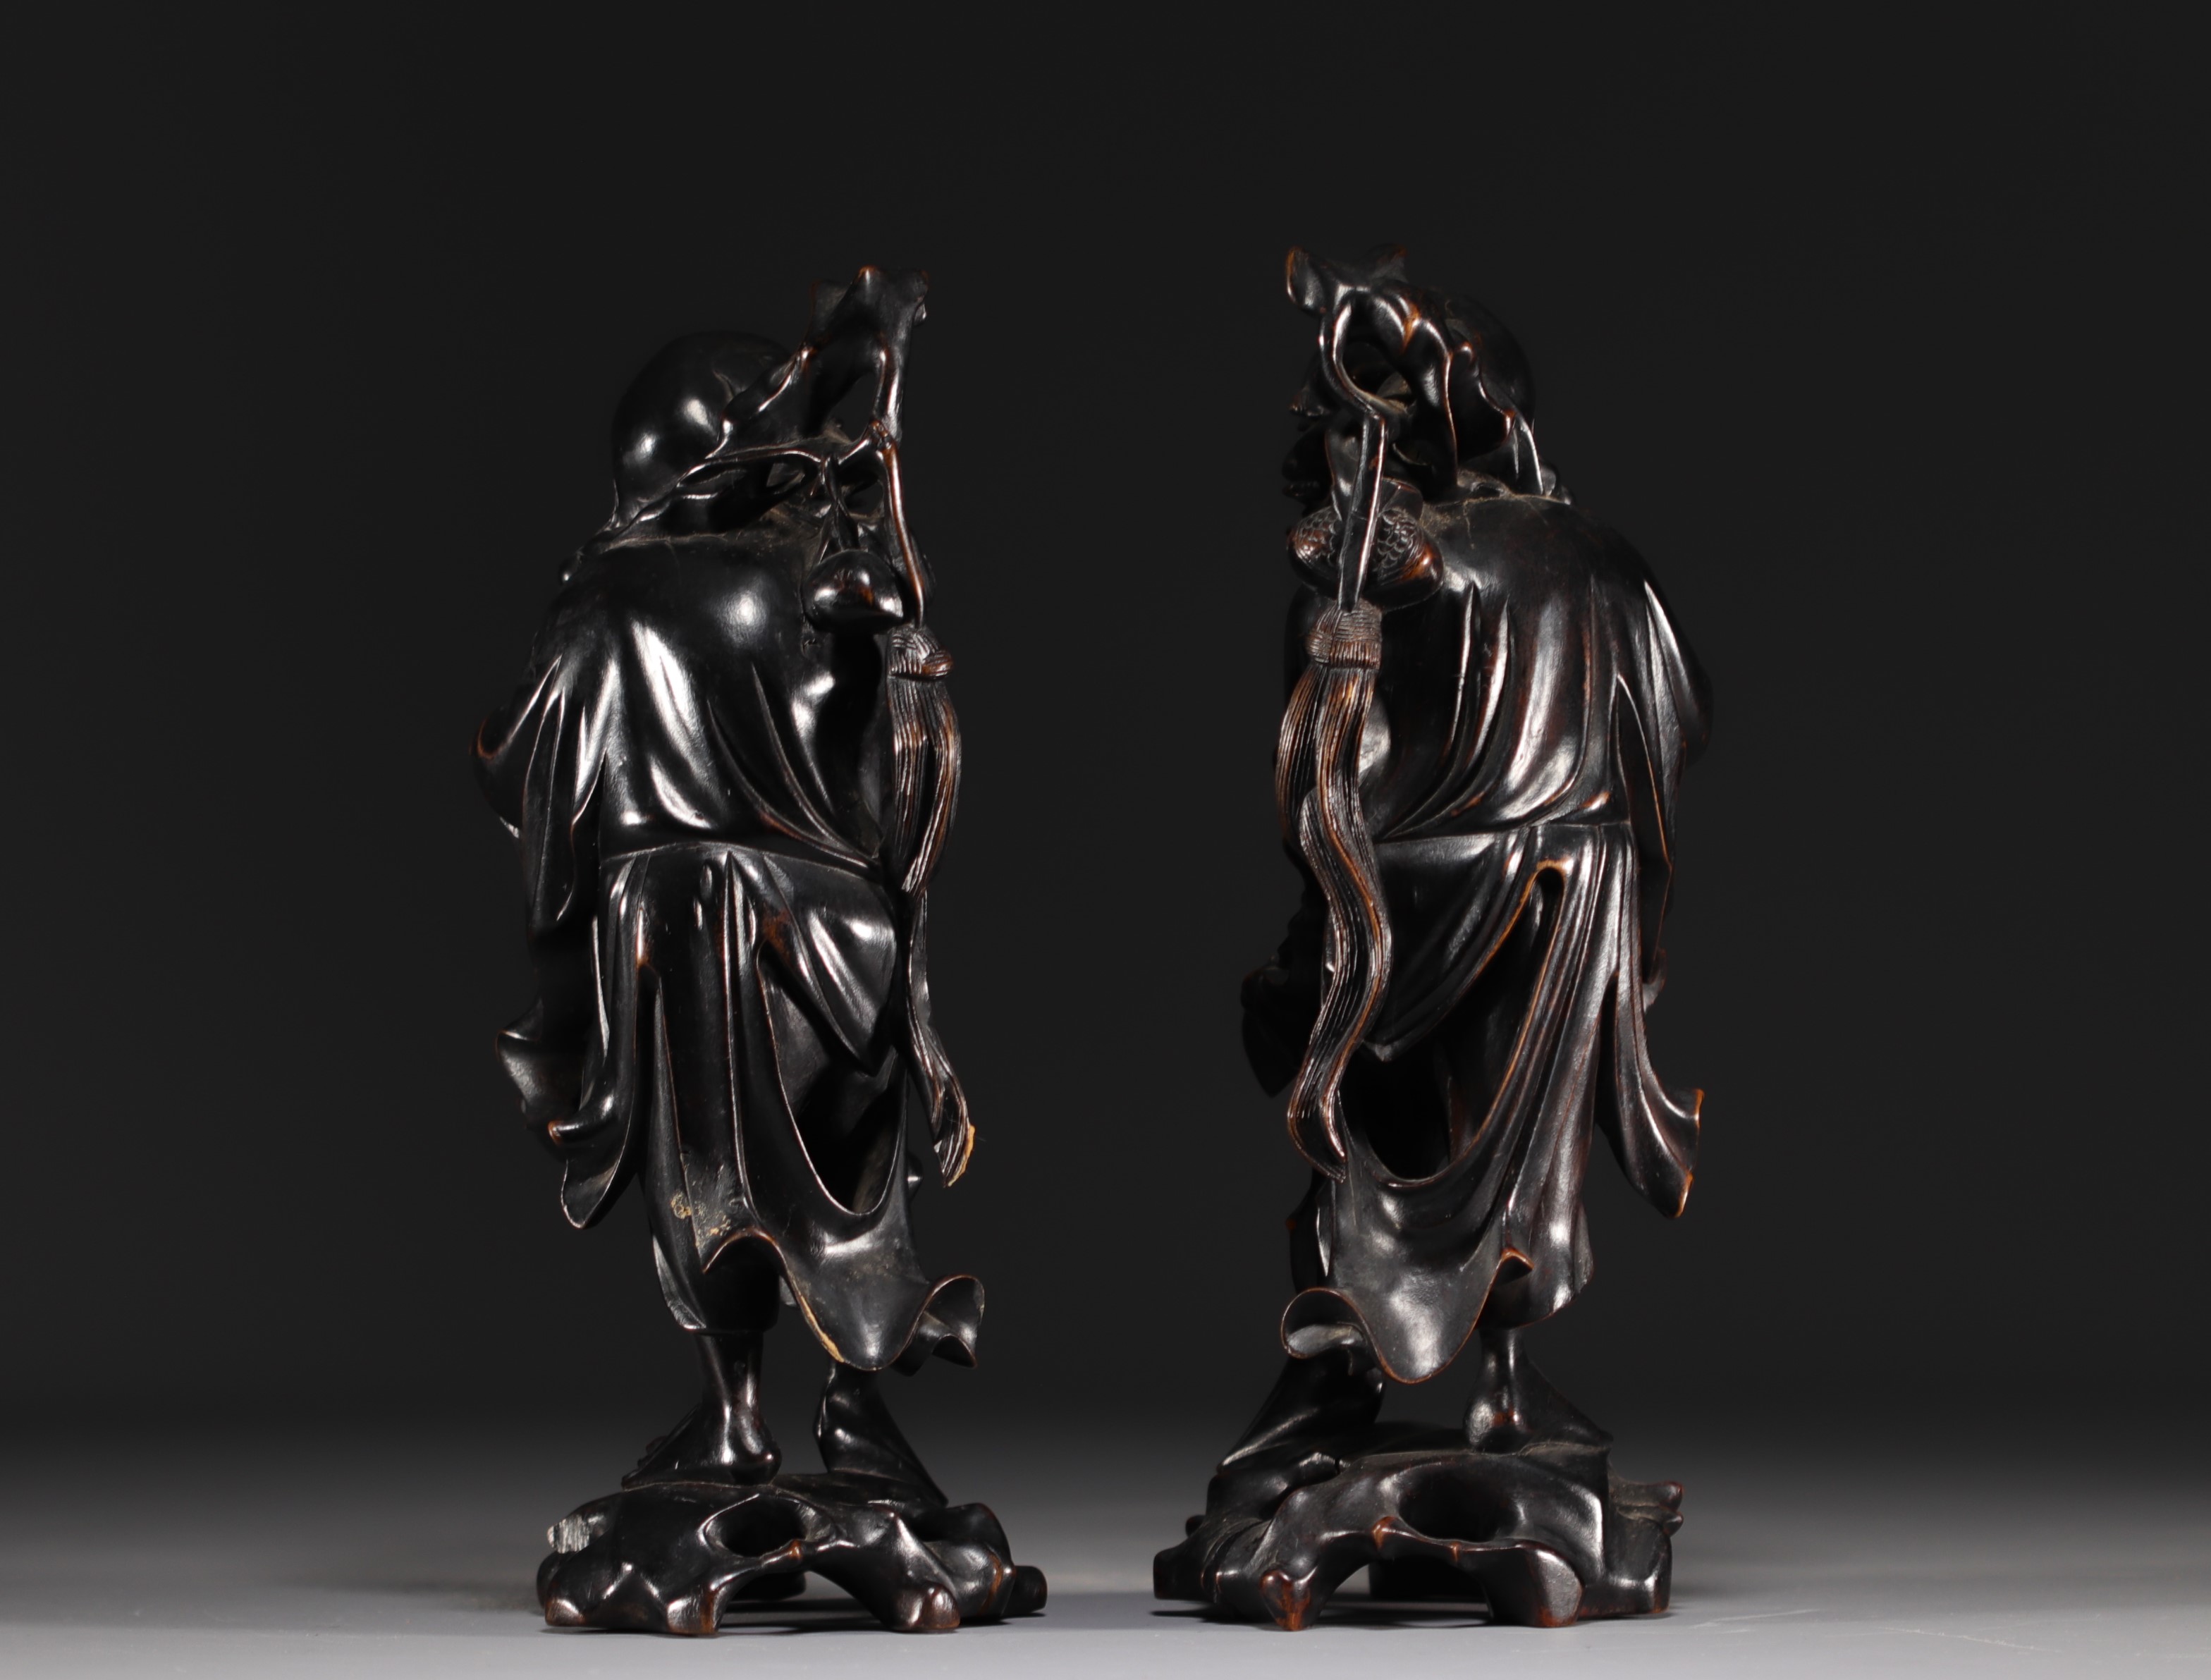 China, Vietnam - Pair of exotic wood carvings representing two figures. - Image 2 of 4